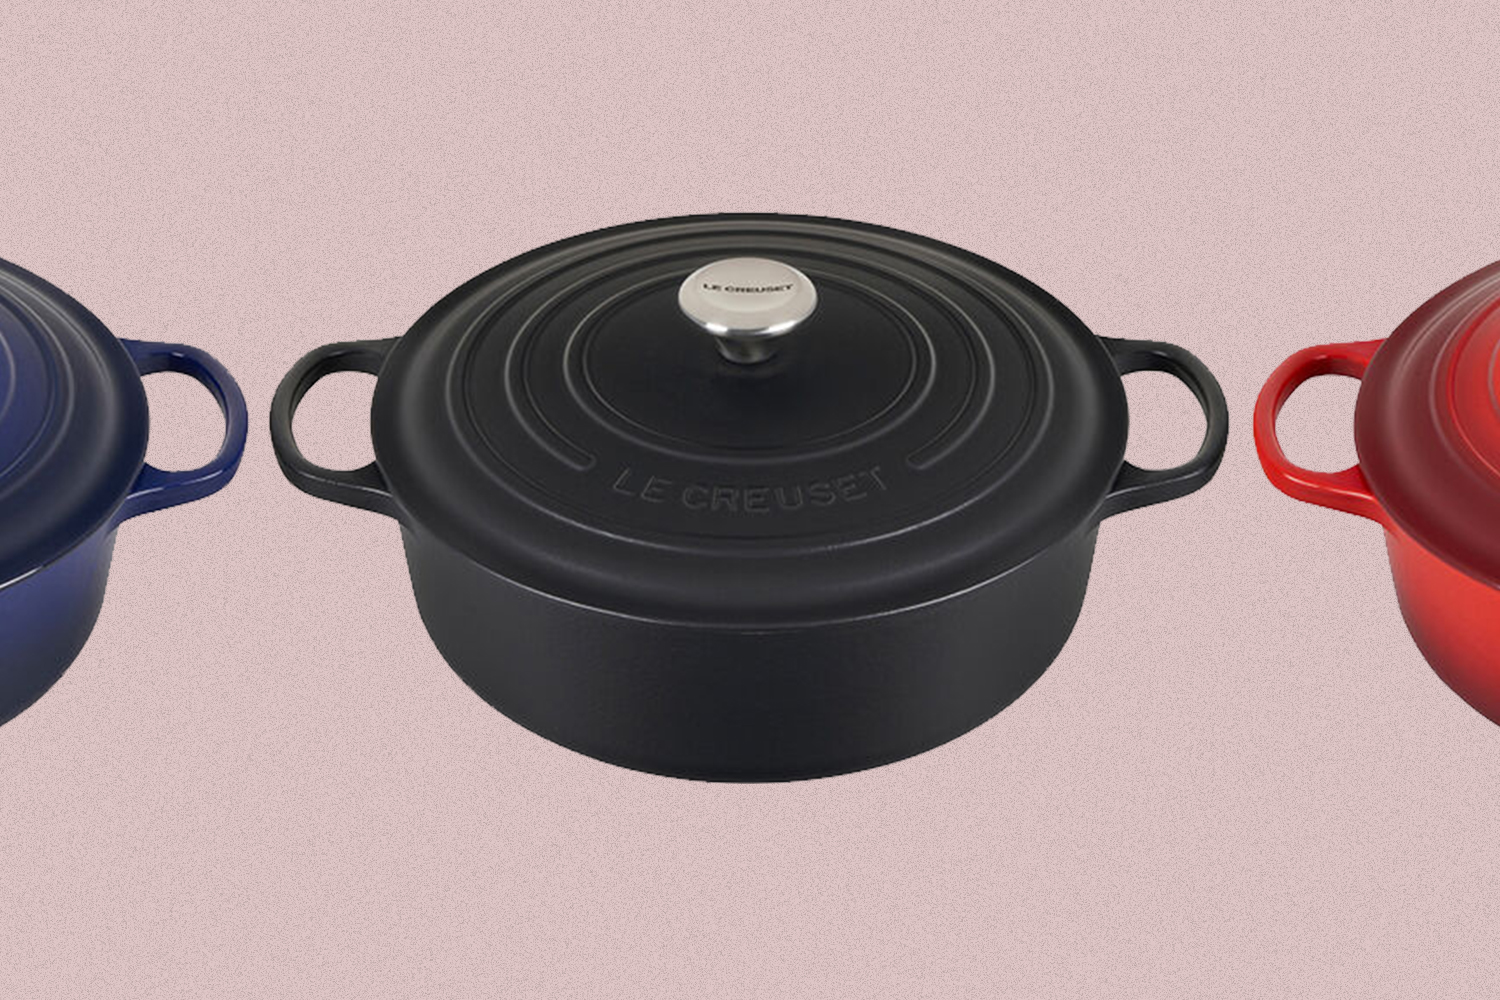 Le Creuset Round Wide Dutch Ovens in blue, black and red